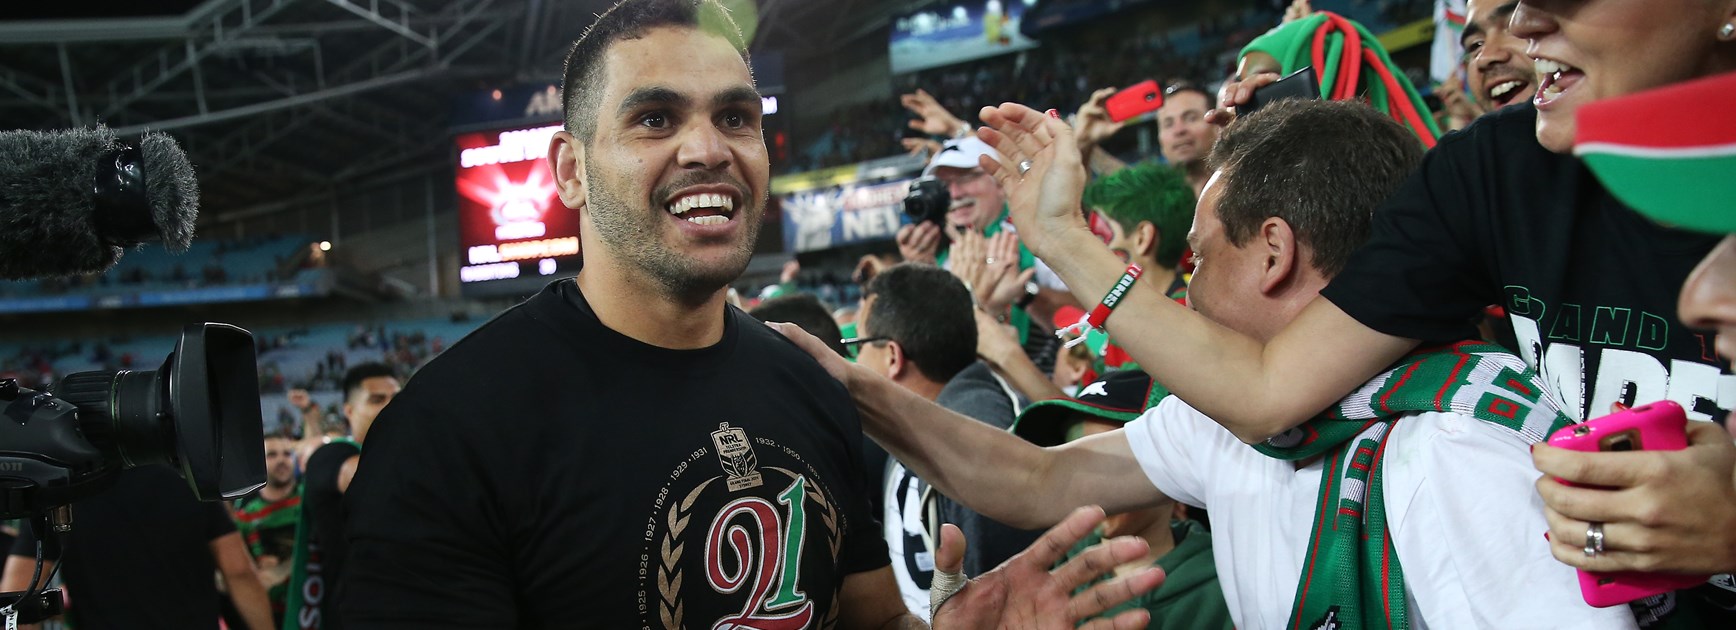 Greg Inglis greets fans after the 2014 grand final